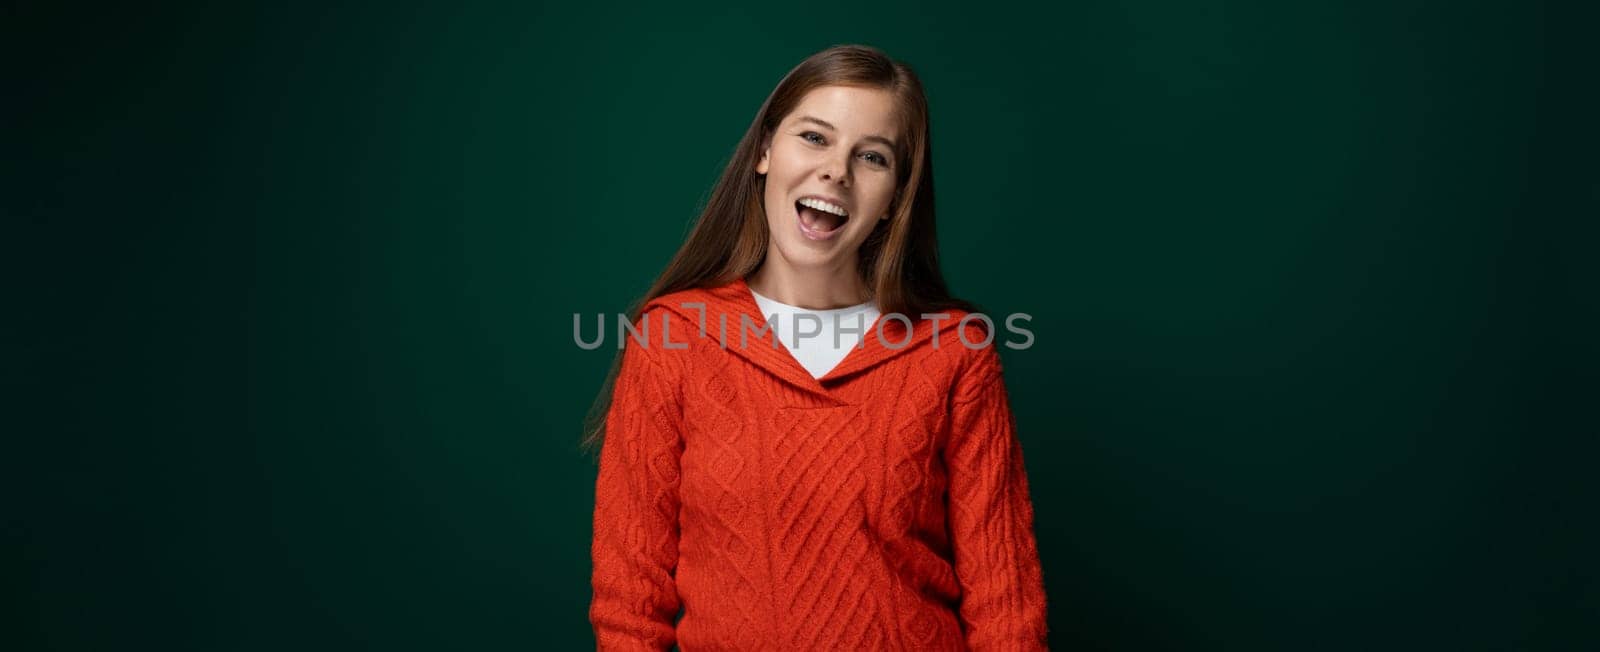 Well-groomed 30 year old woman with brown hair wears a red knitted sweater on a green background.